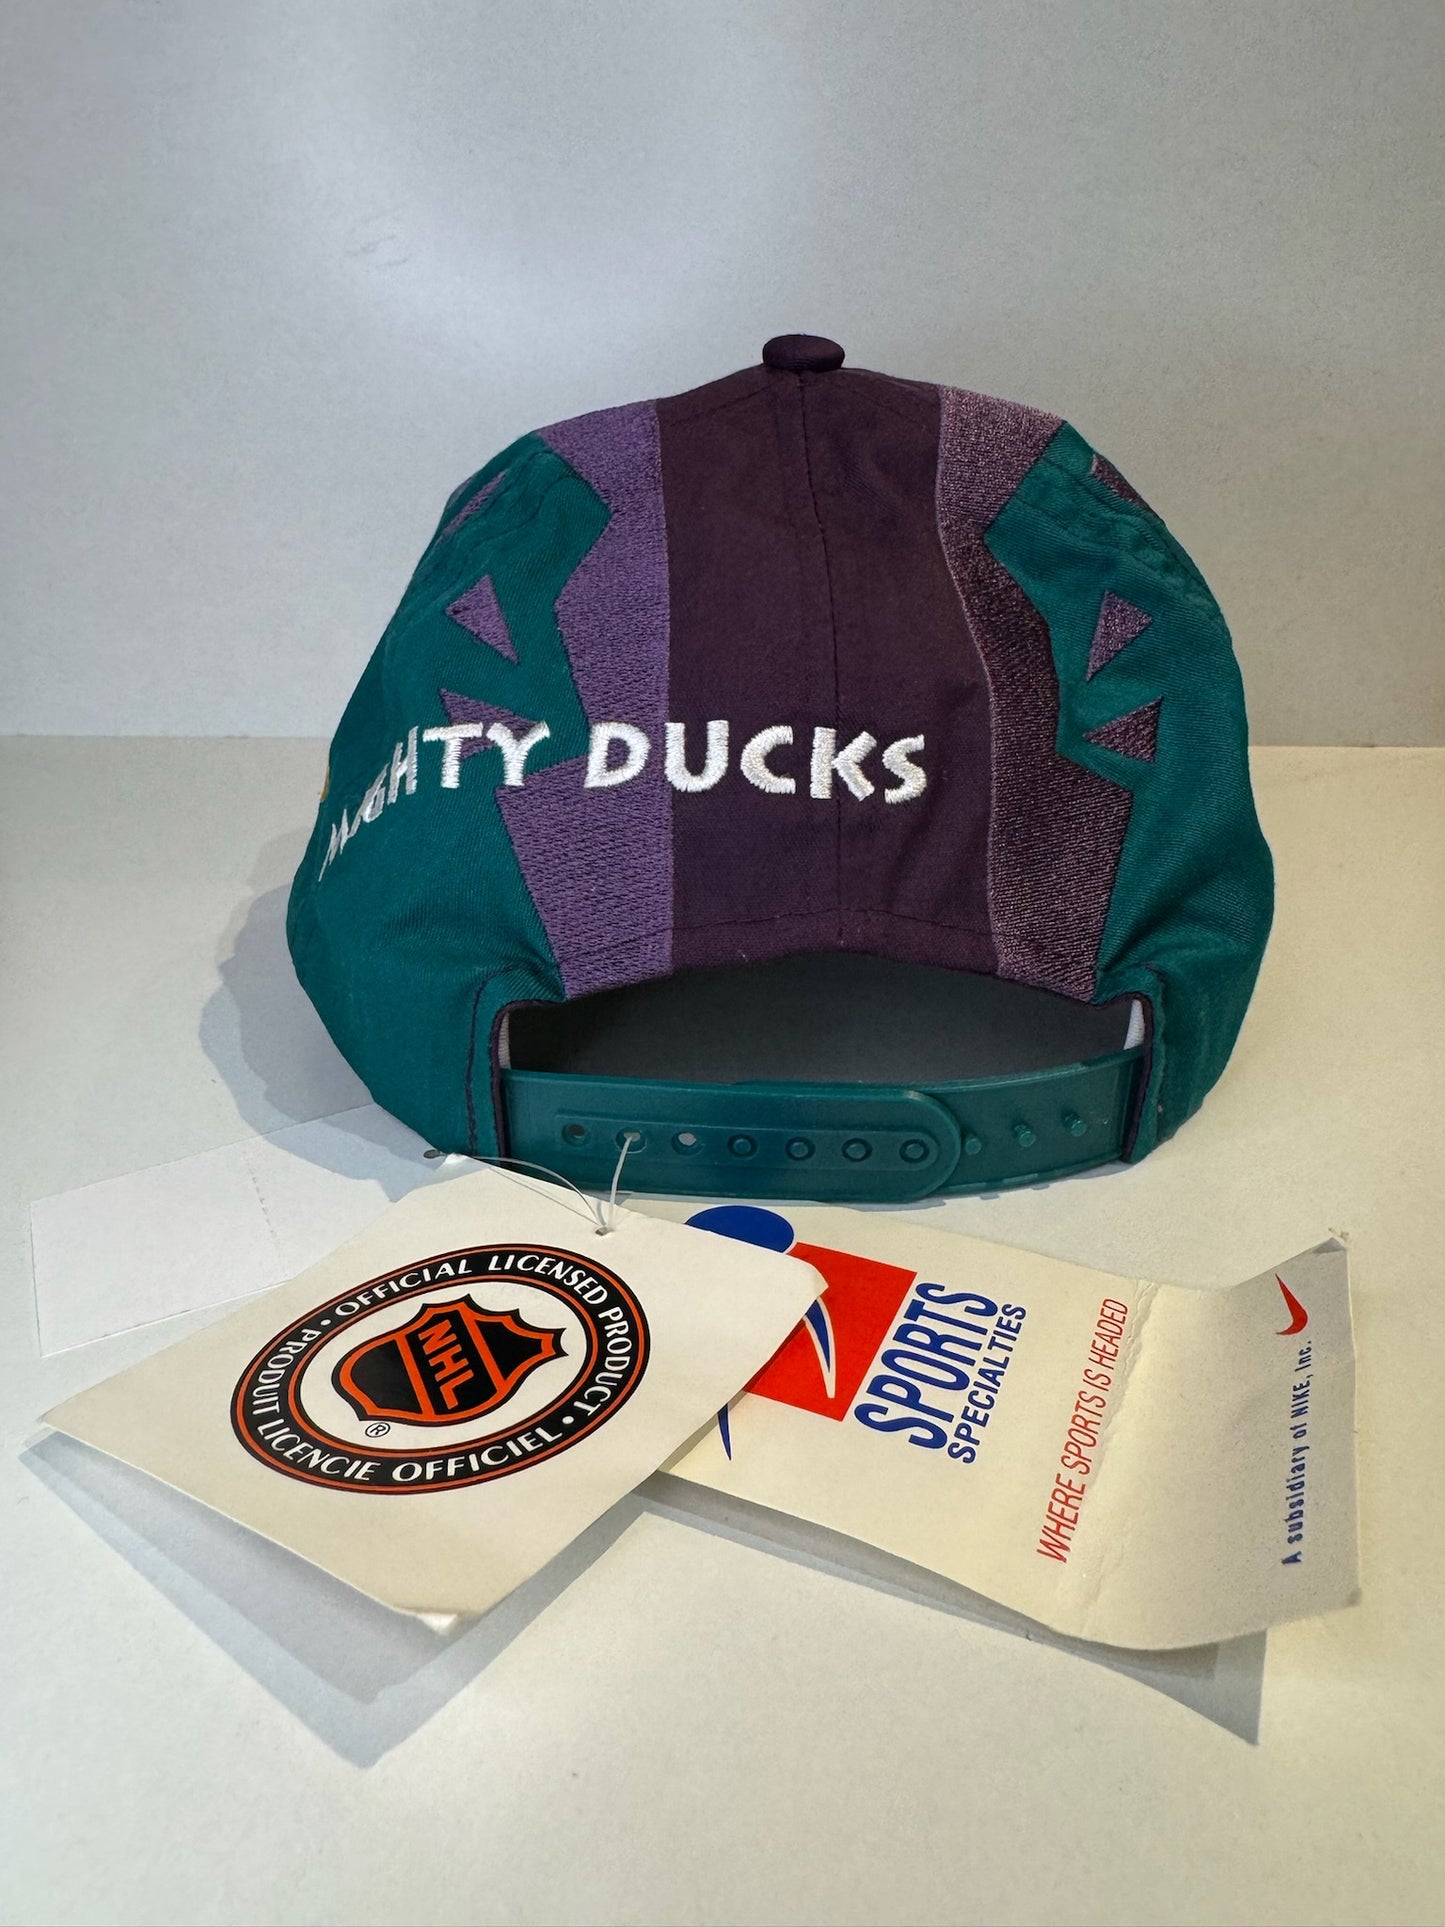 "DS" VINTAGE 90s MIGHTY DUCKS SPORTS SPECIALTIES "SHATTER" SNAPBACK HAT